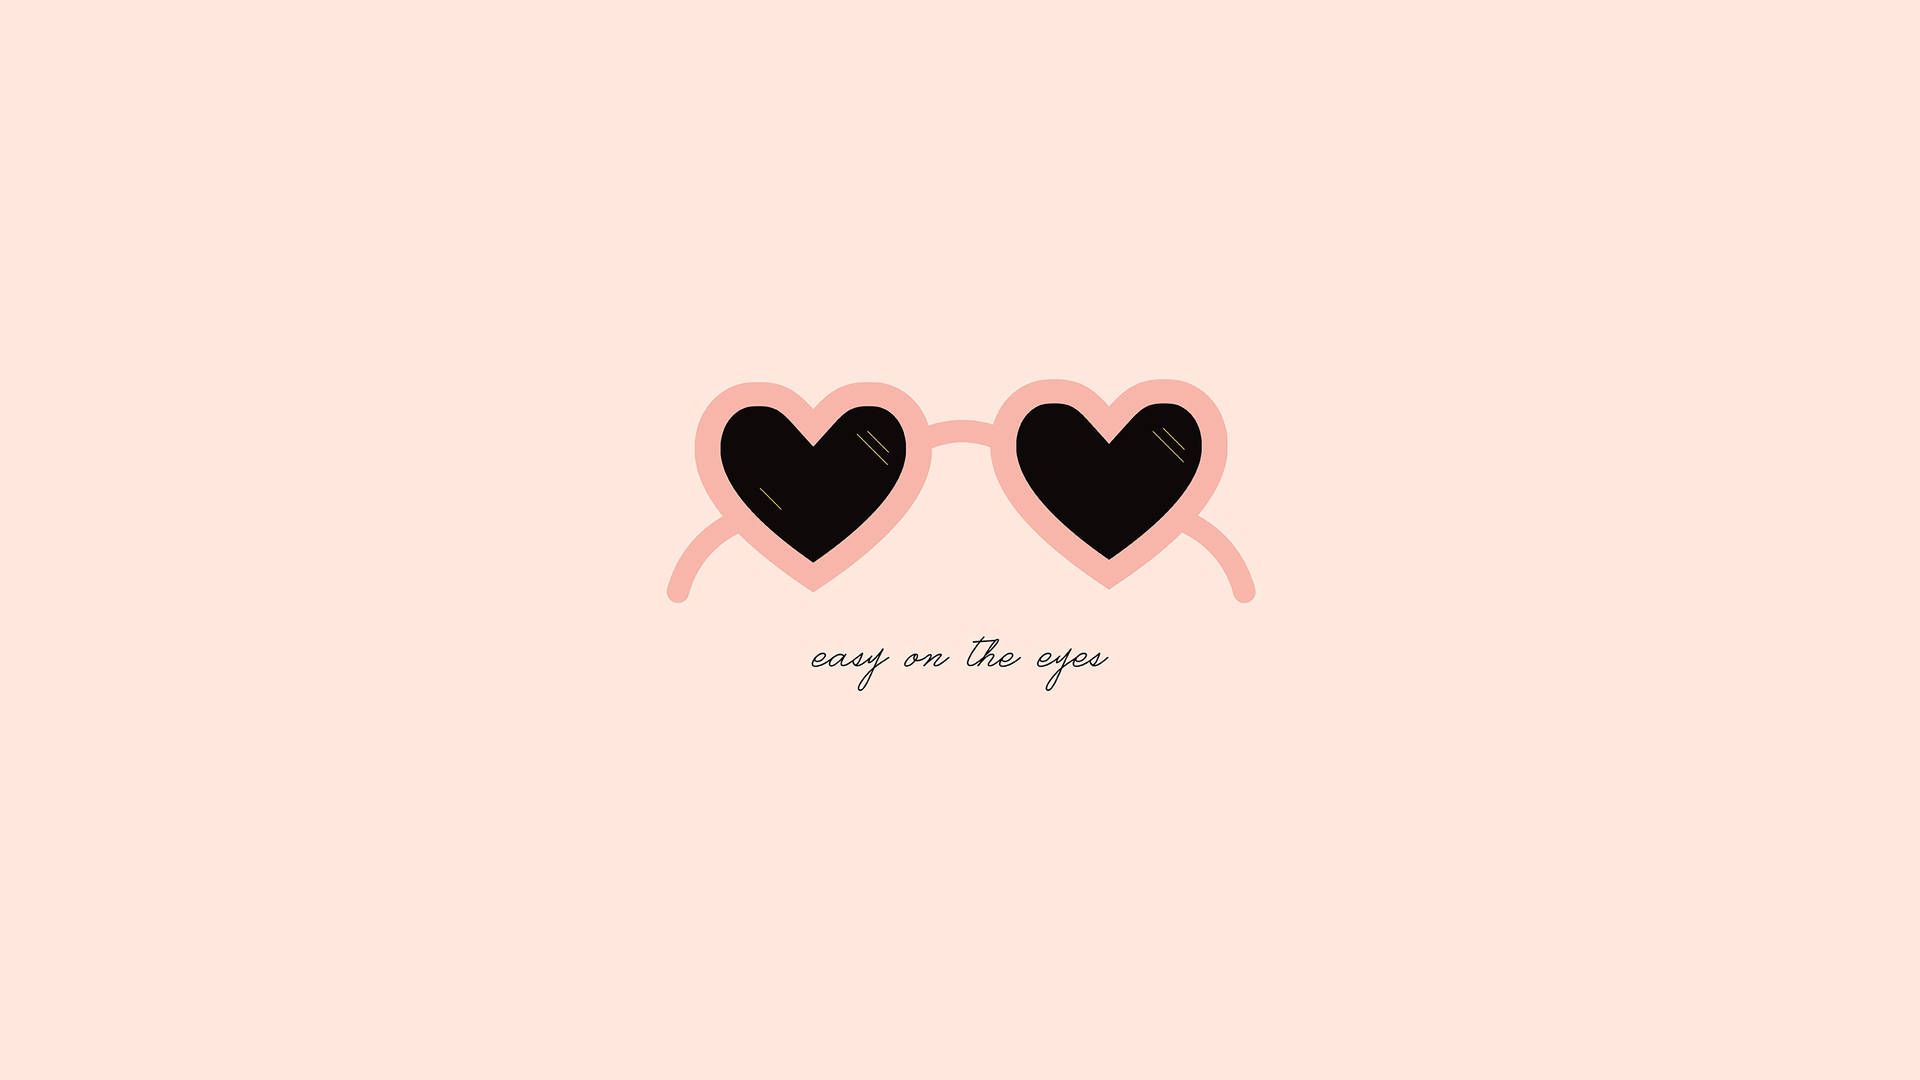 A pink heart with black hearts on it - February